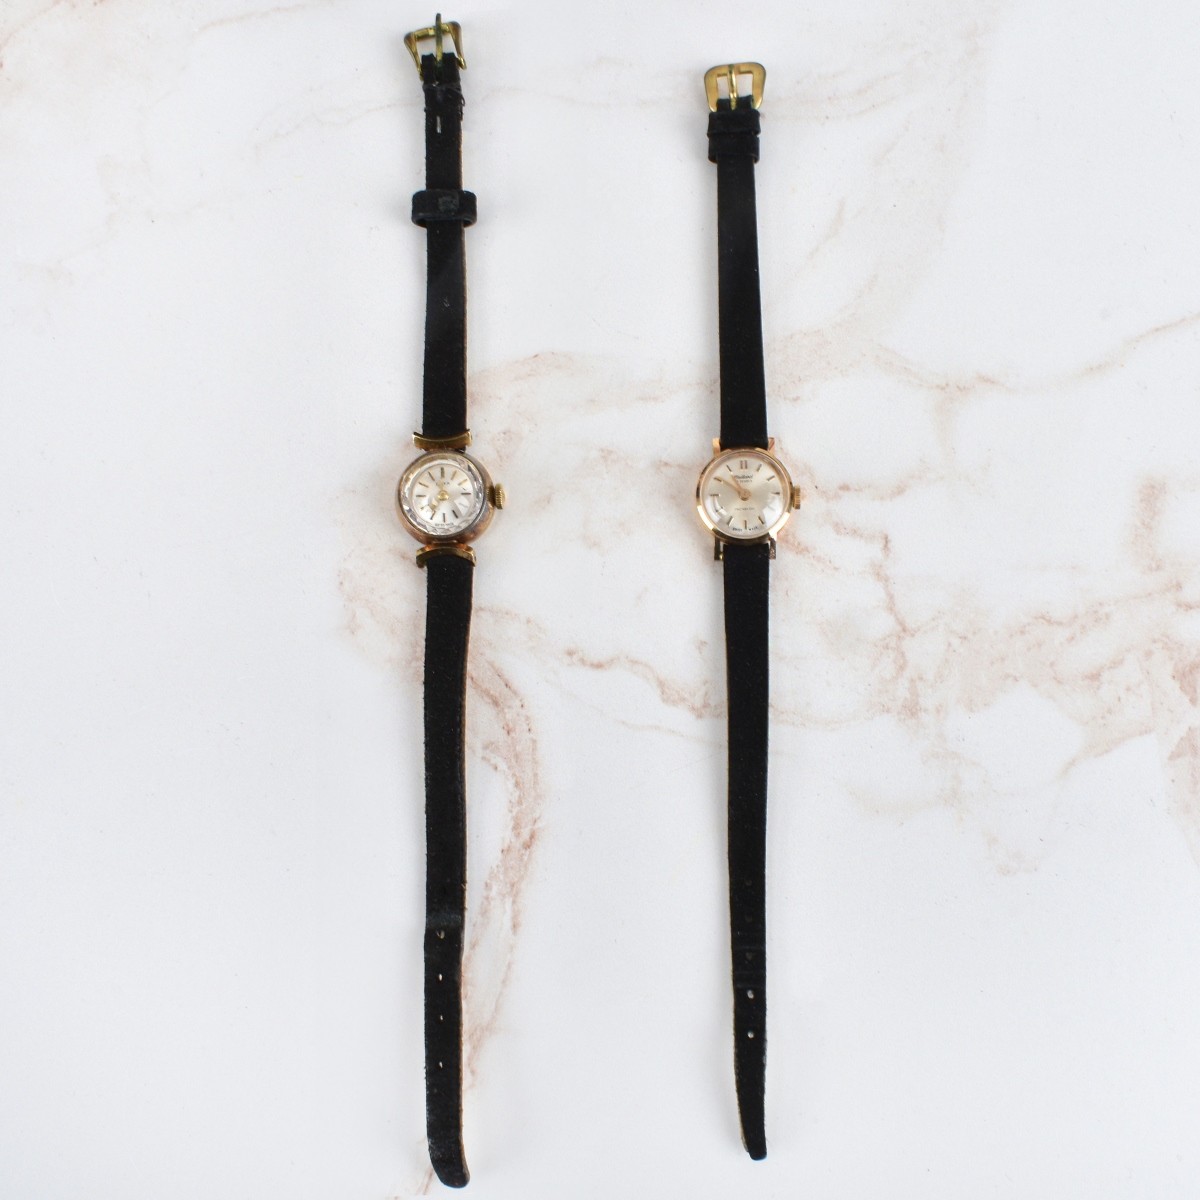 Vintage Lady's Watches